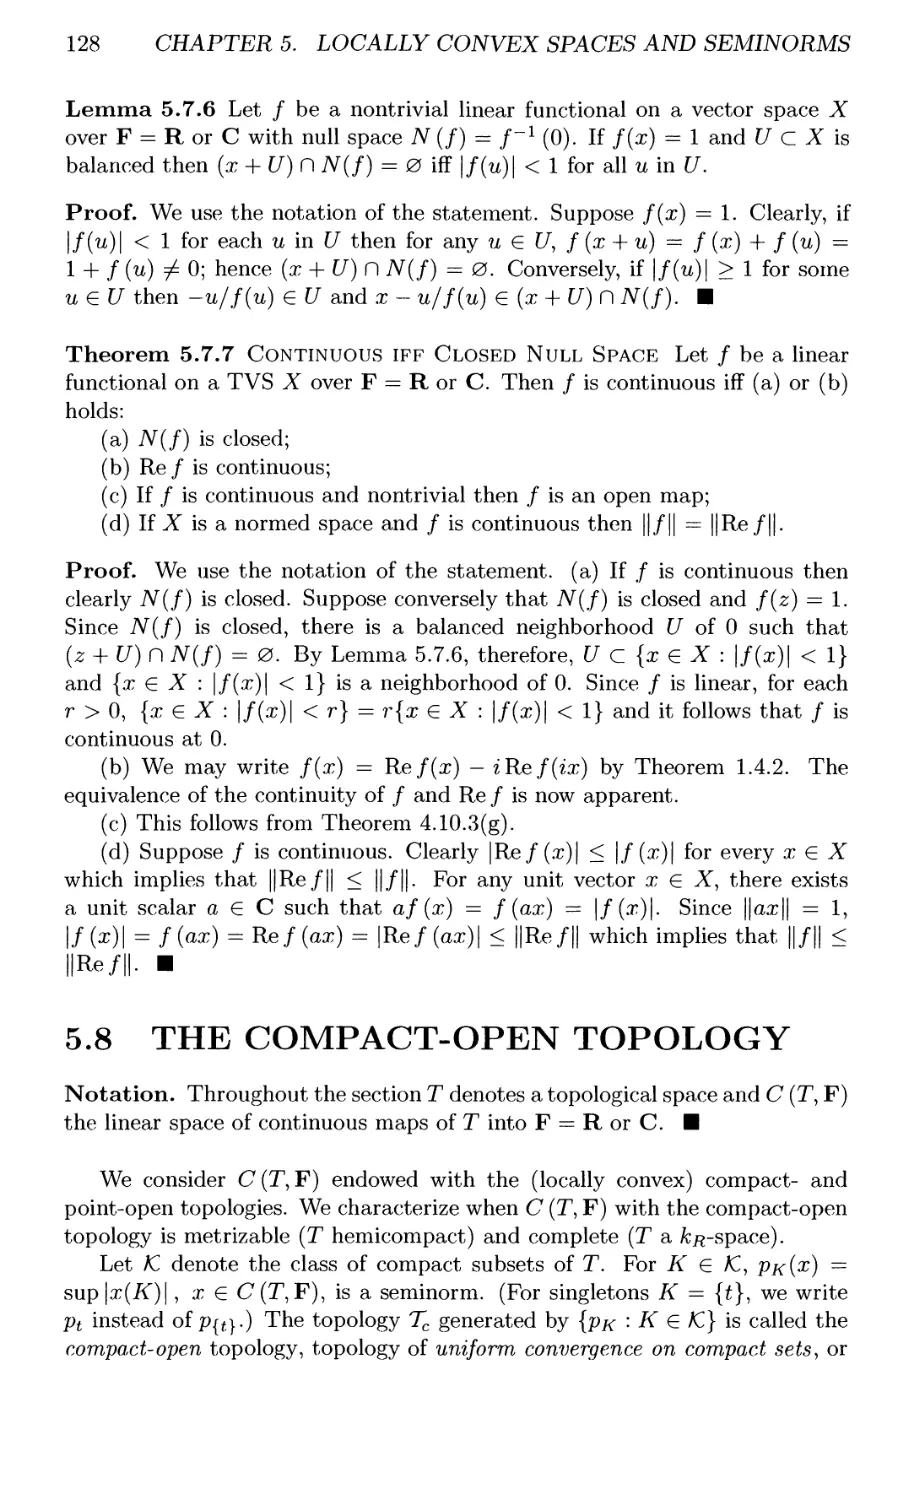 5.8 THE COMPACT-OPEN TOPOLOGY